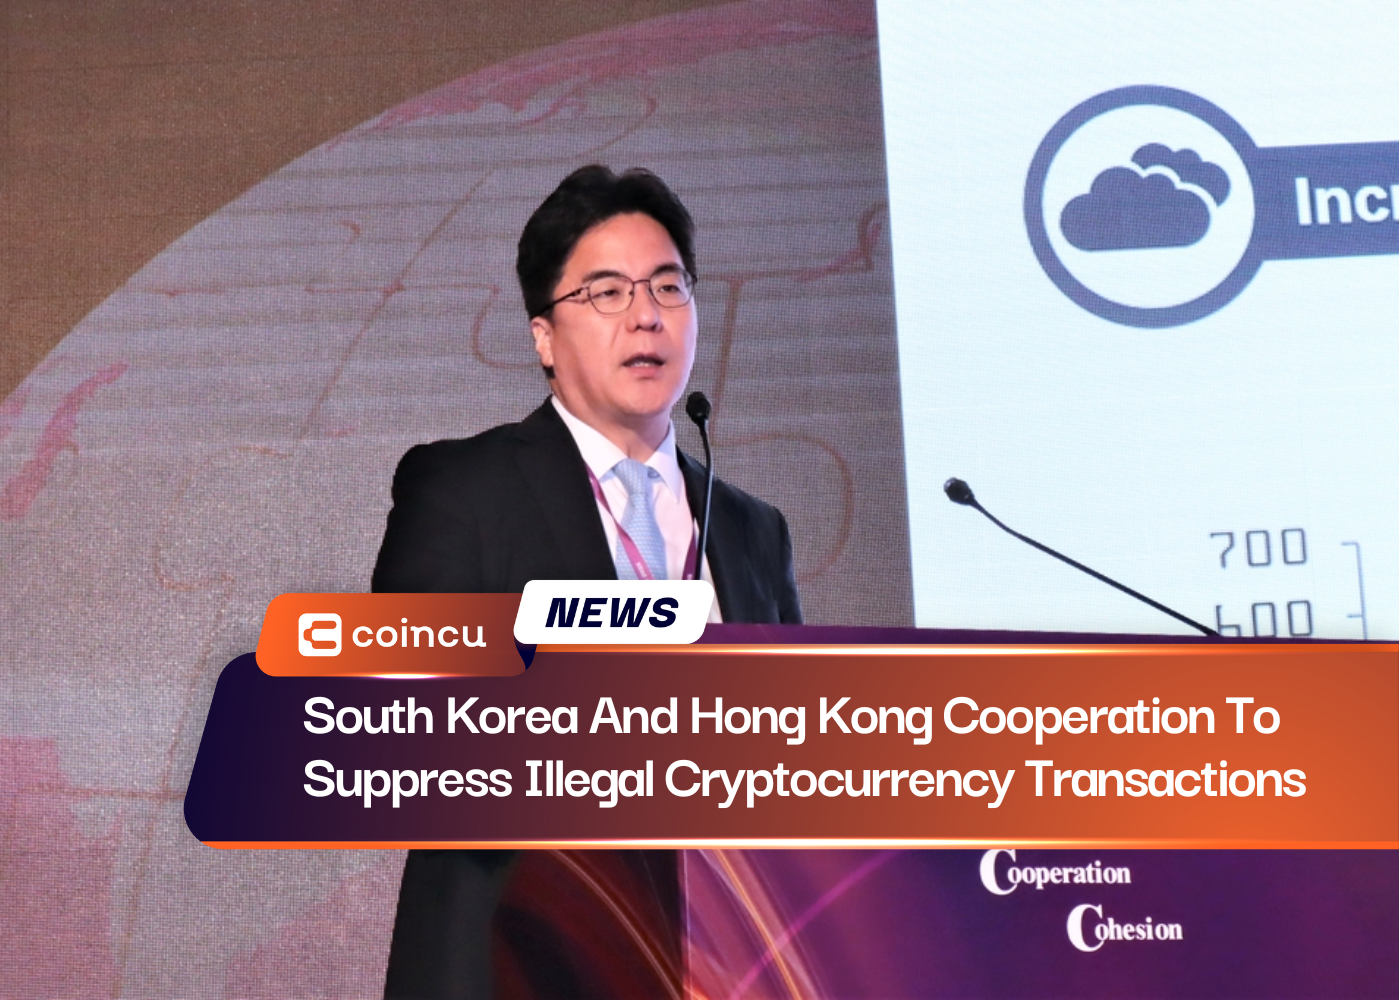 South Korea And Hong Kong Strengthen Cooperation To Suppress Illegal Cryptocurrency Transactions